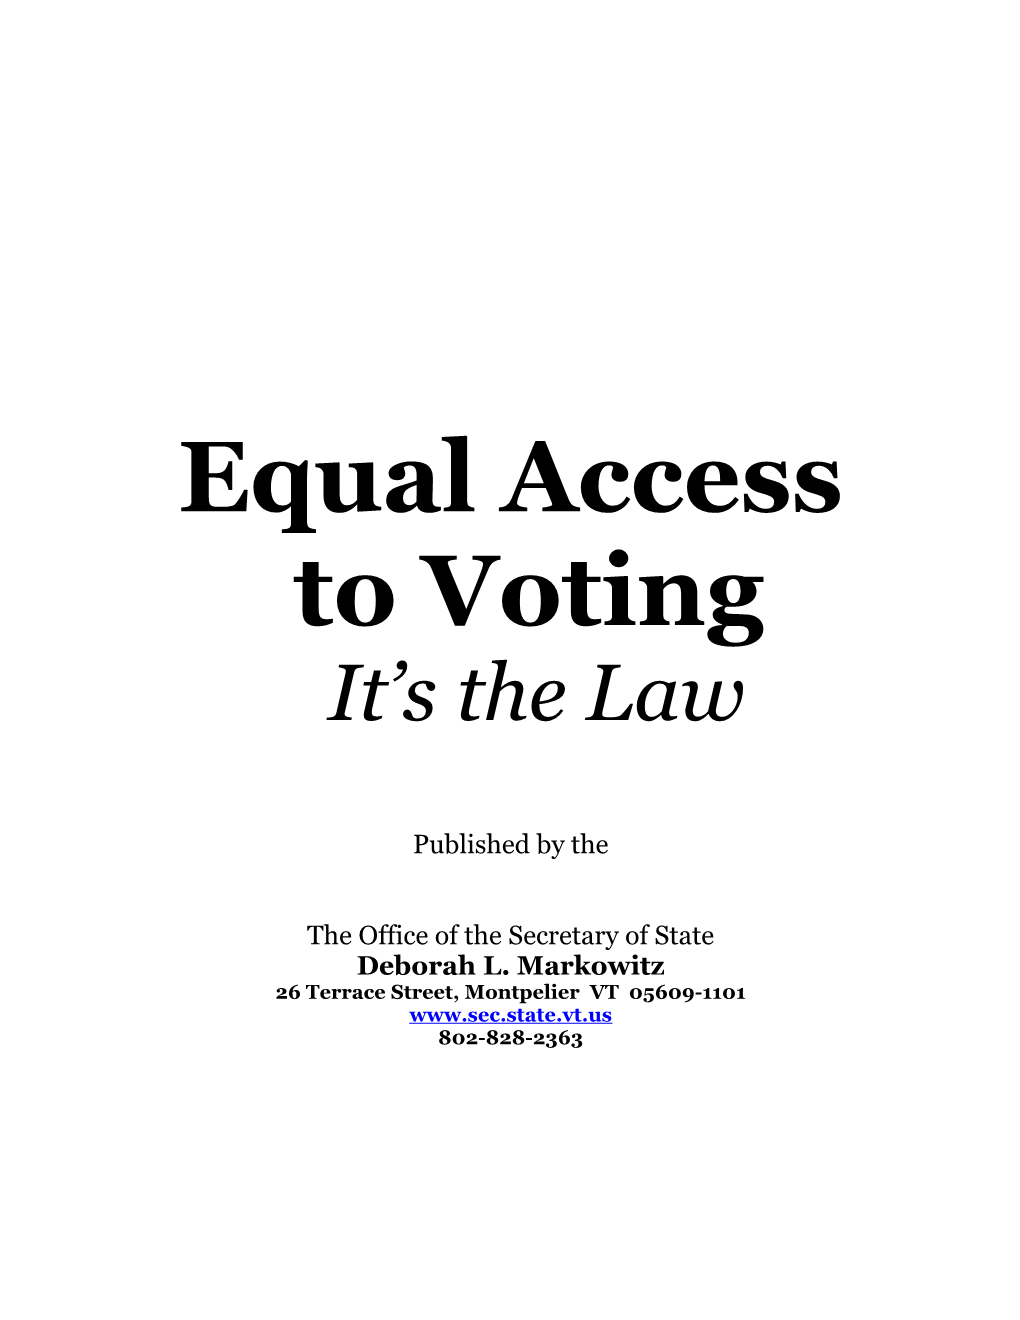 Equal Access to Voting